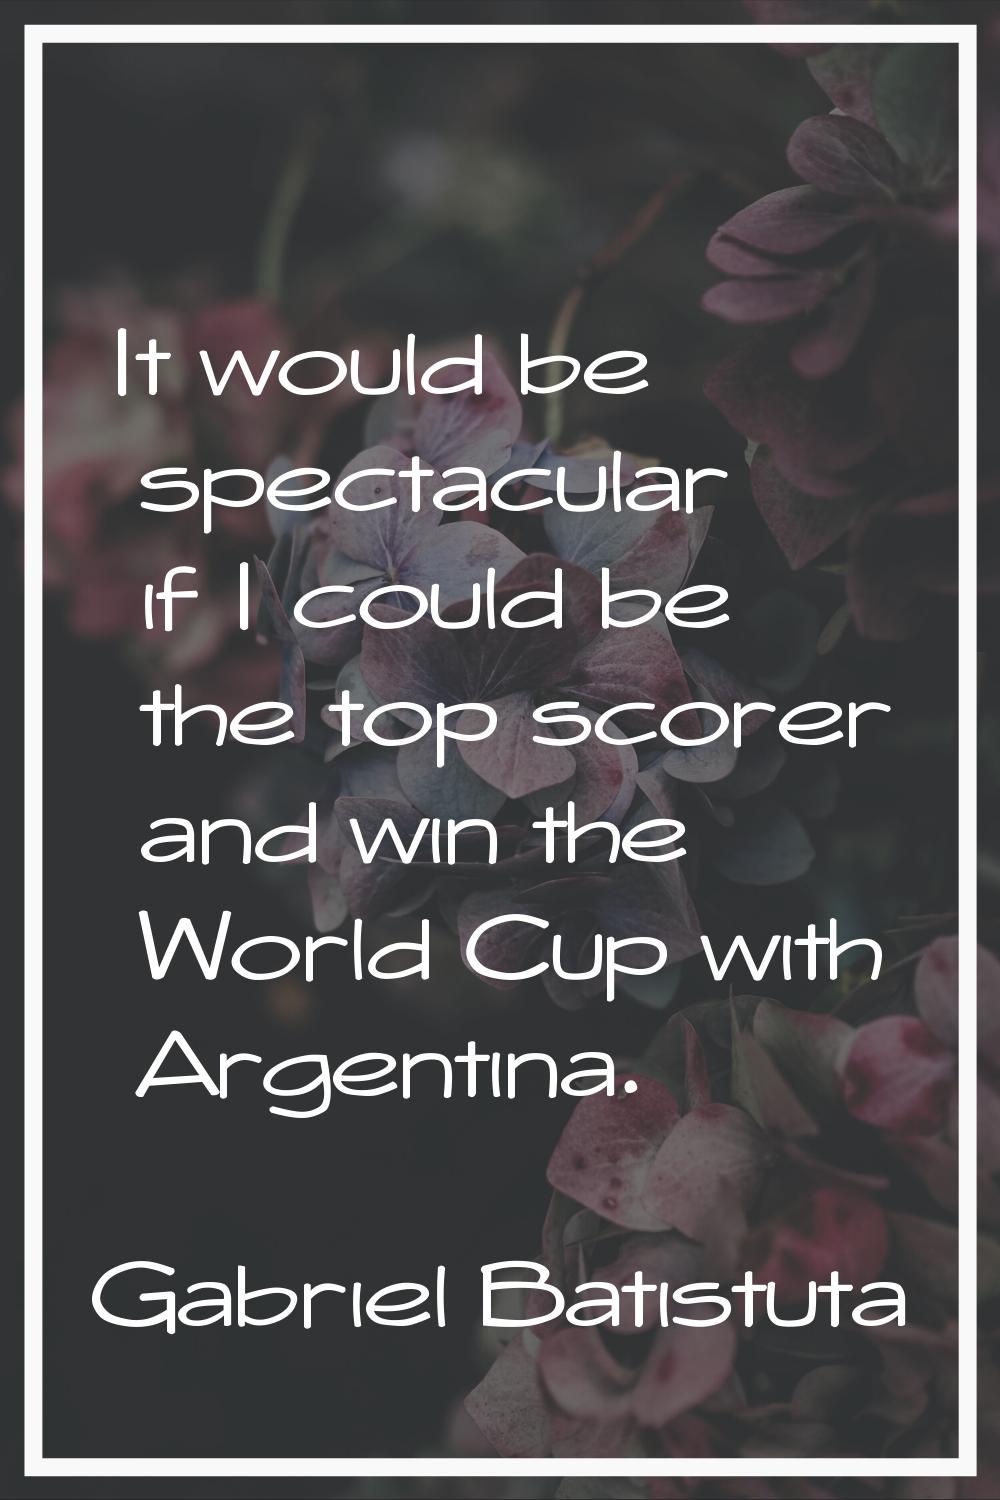 It would be spectacular if I could be the top scorer and win the World Cup with Argentina.